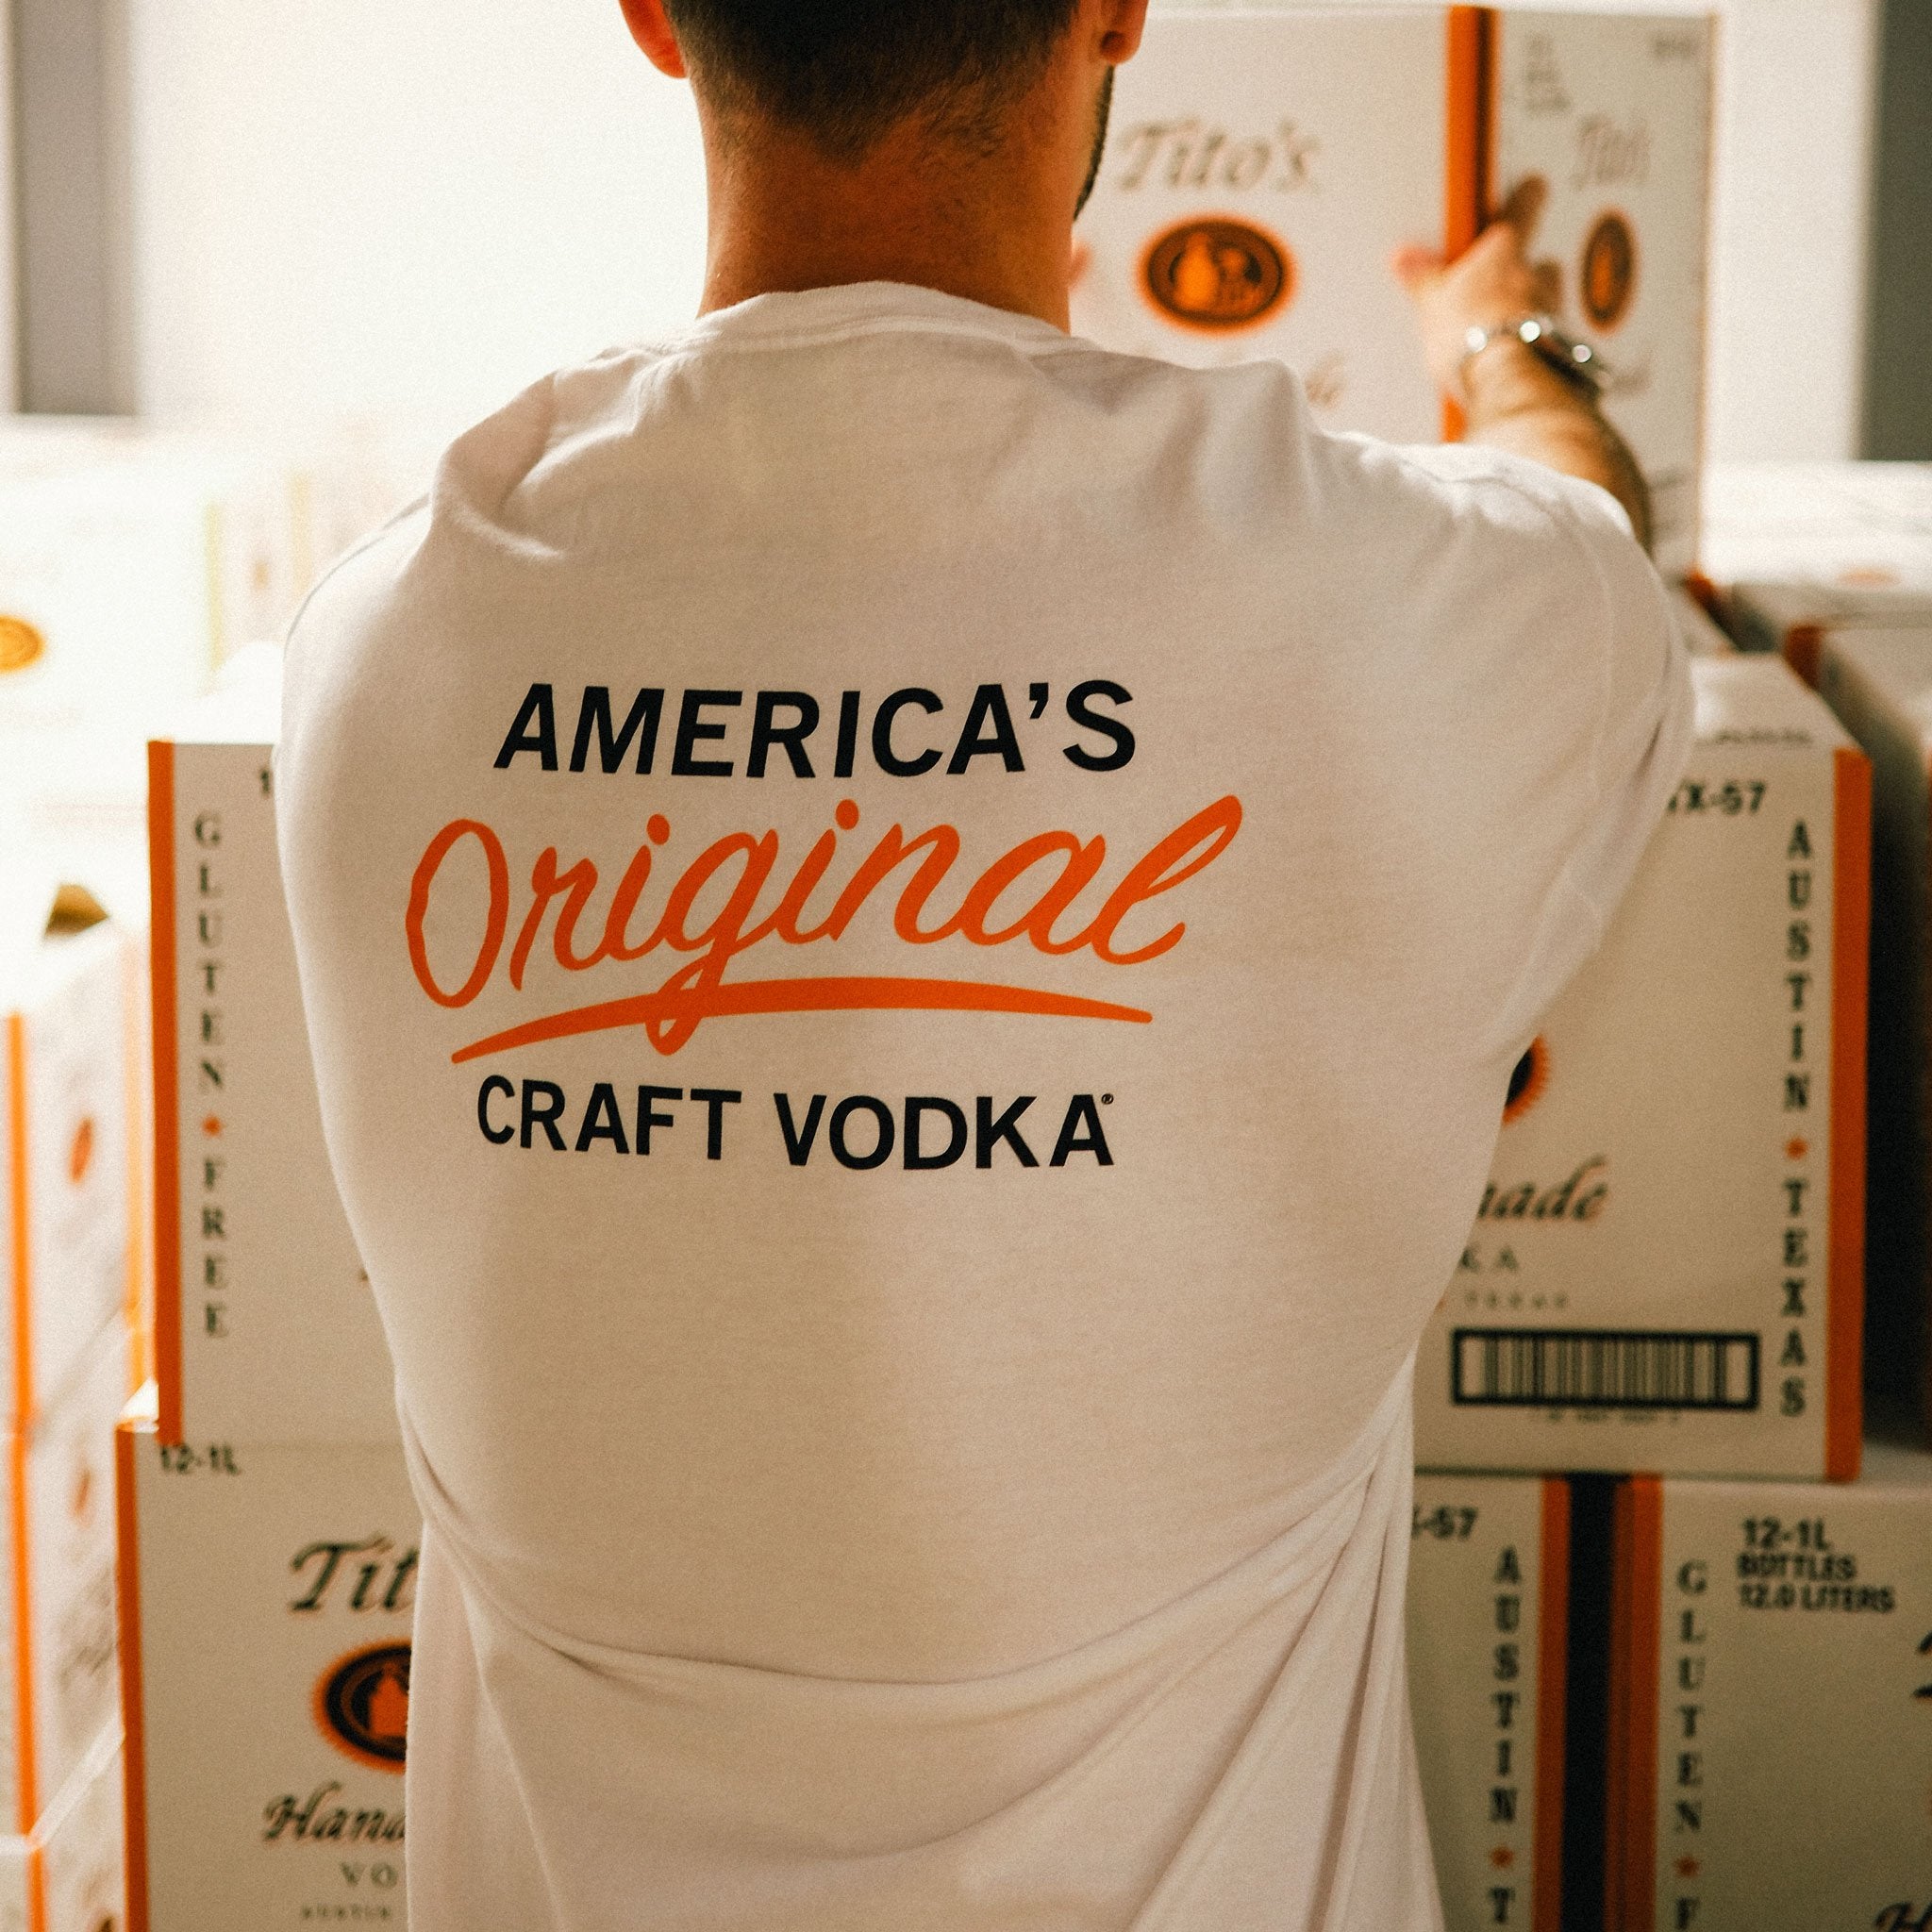 Back of person wearing short-sleeve white t-shirt with America's Original Craft Vodka mark